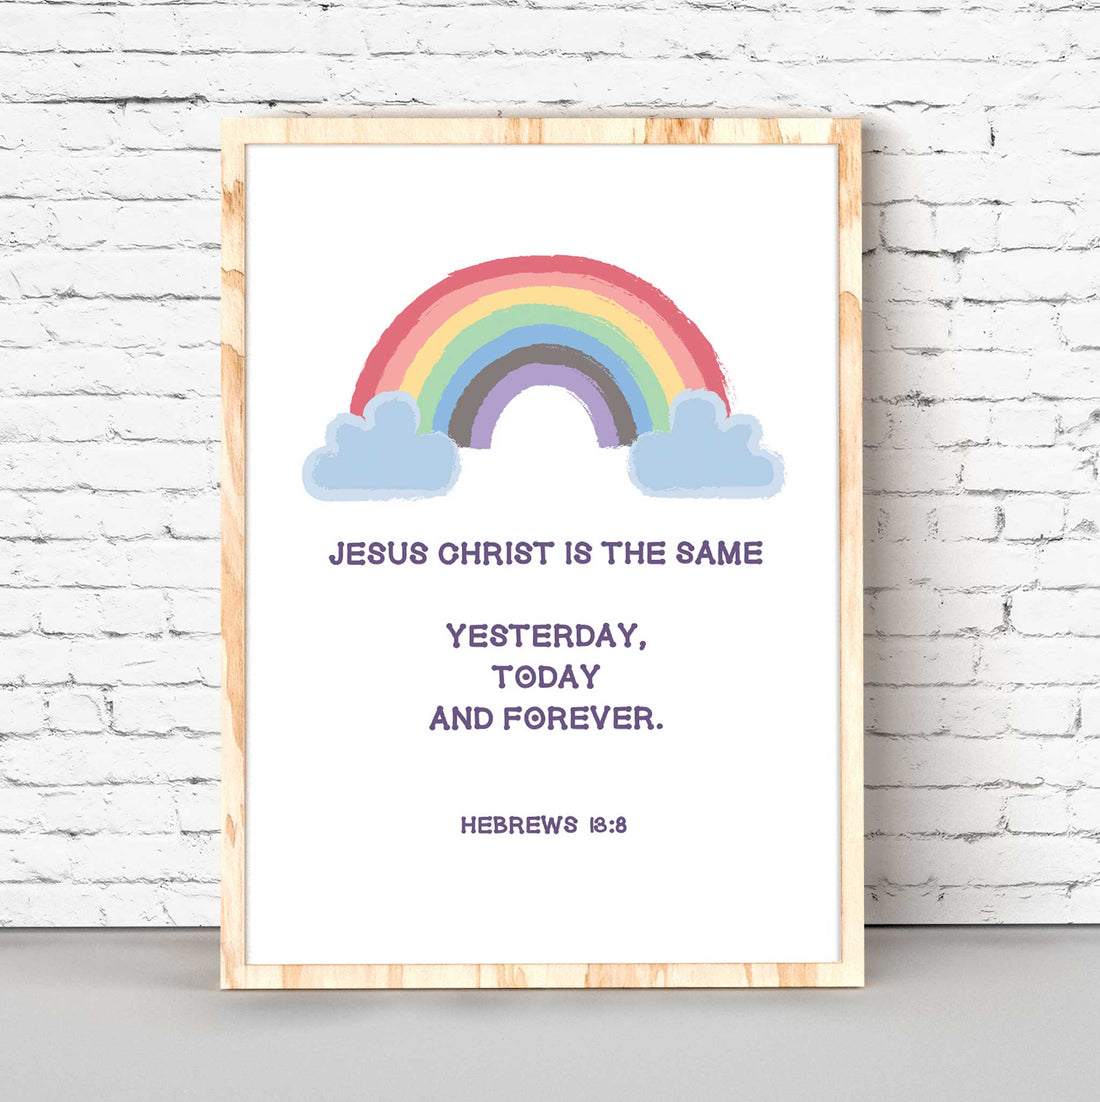 Hebrews 13:8 Rainbow Cloud-Jesus Christ is the same yesterday, today and forever. This Christian Nursery wall decor is a simply beautiful way to remind your little ones that God is always with them. Featuring an adorable rainbow and the Bible verseHebrews 13:8, this wall art is perfect for hanging in a bedroom or playroom. It makes a great Christian baby shower gift, too!